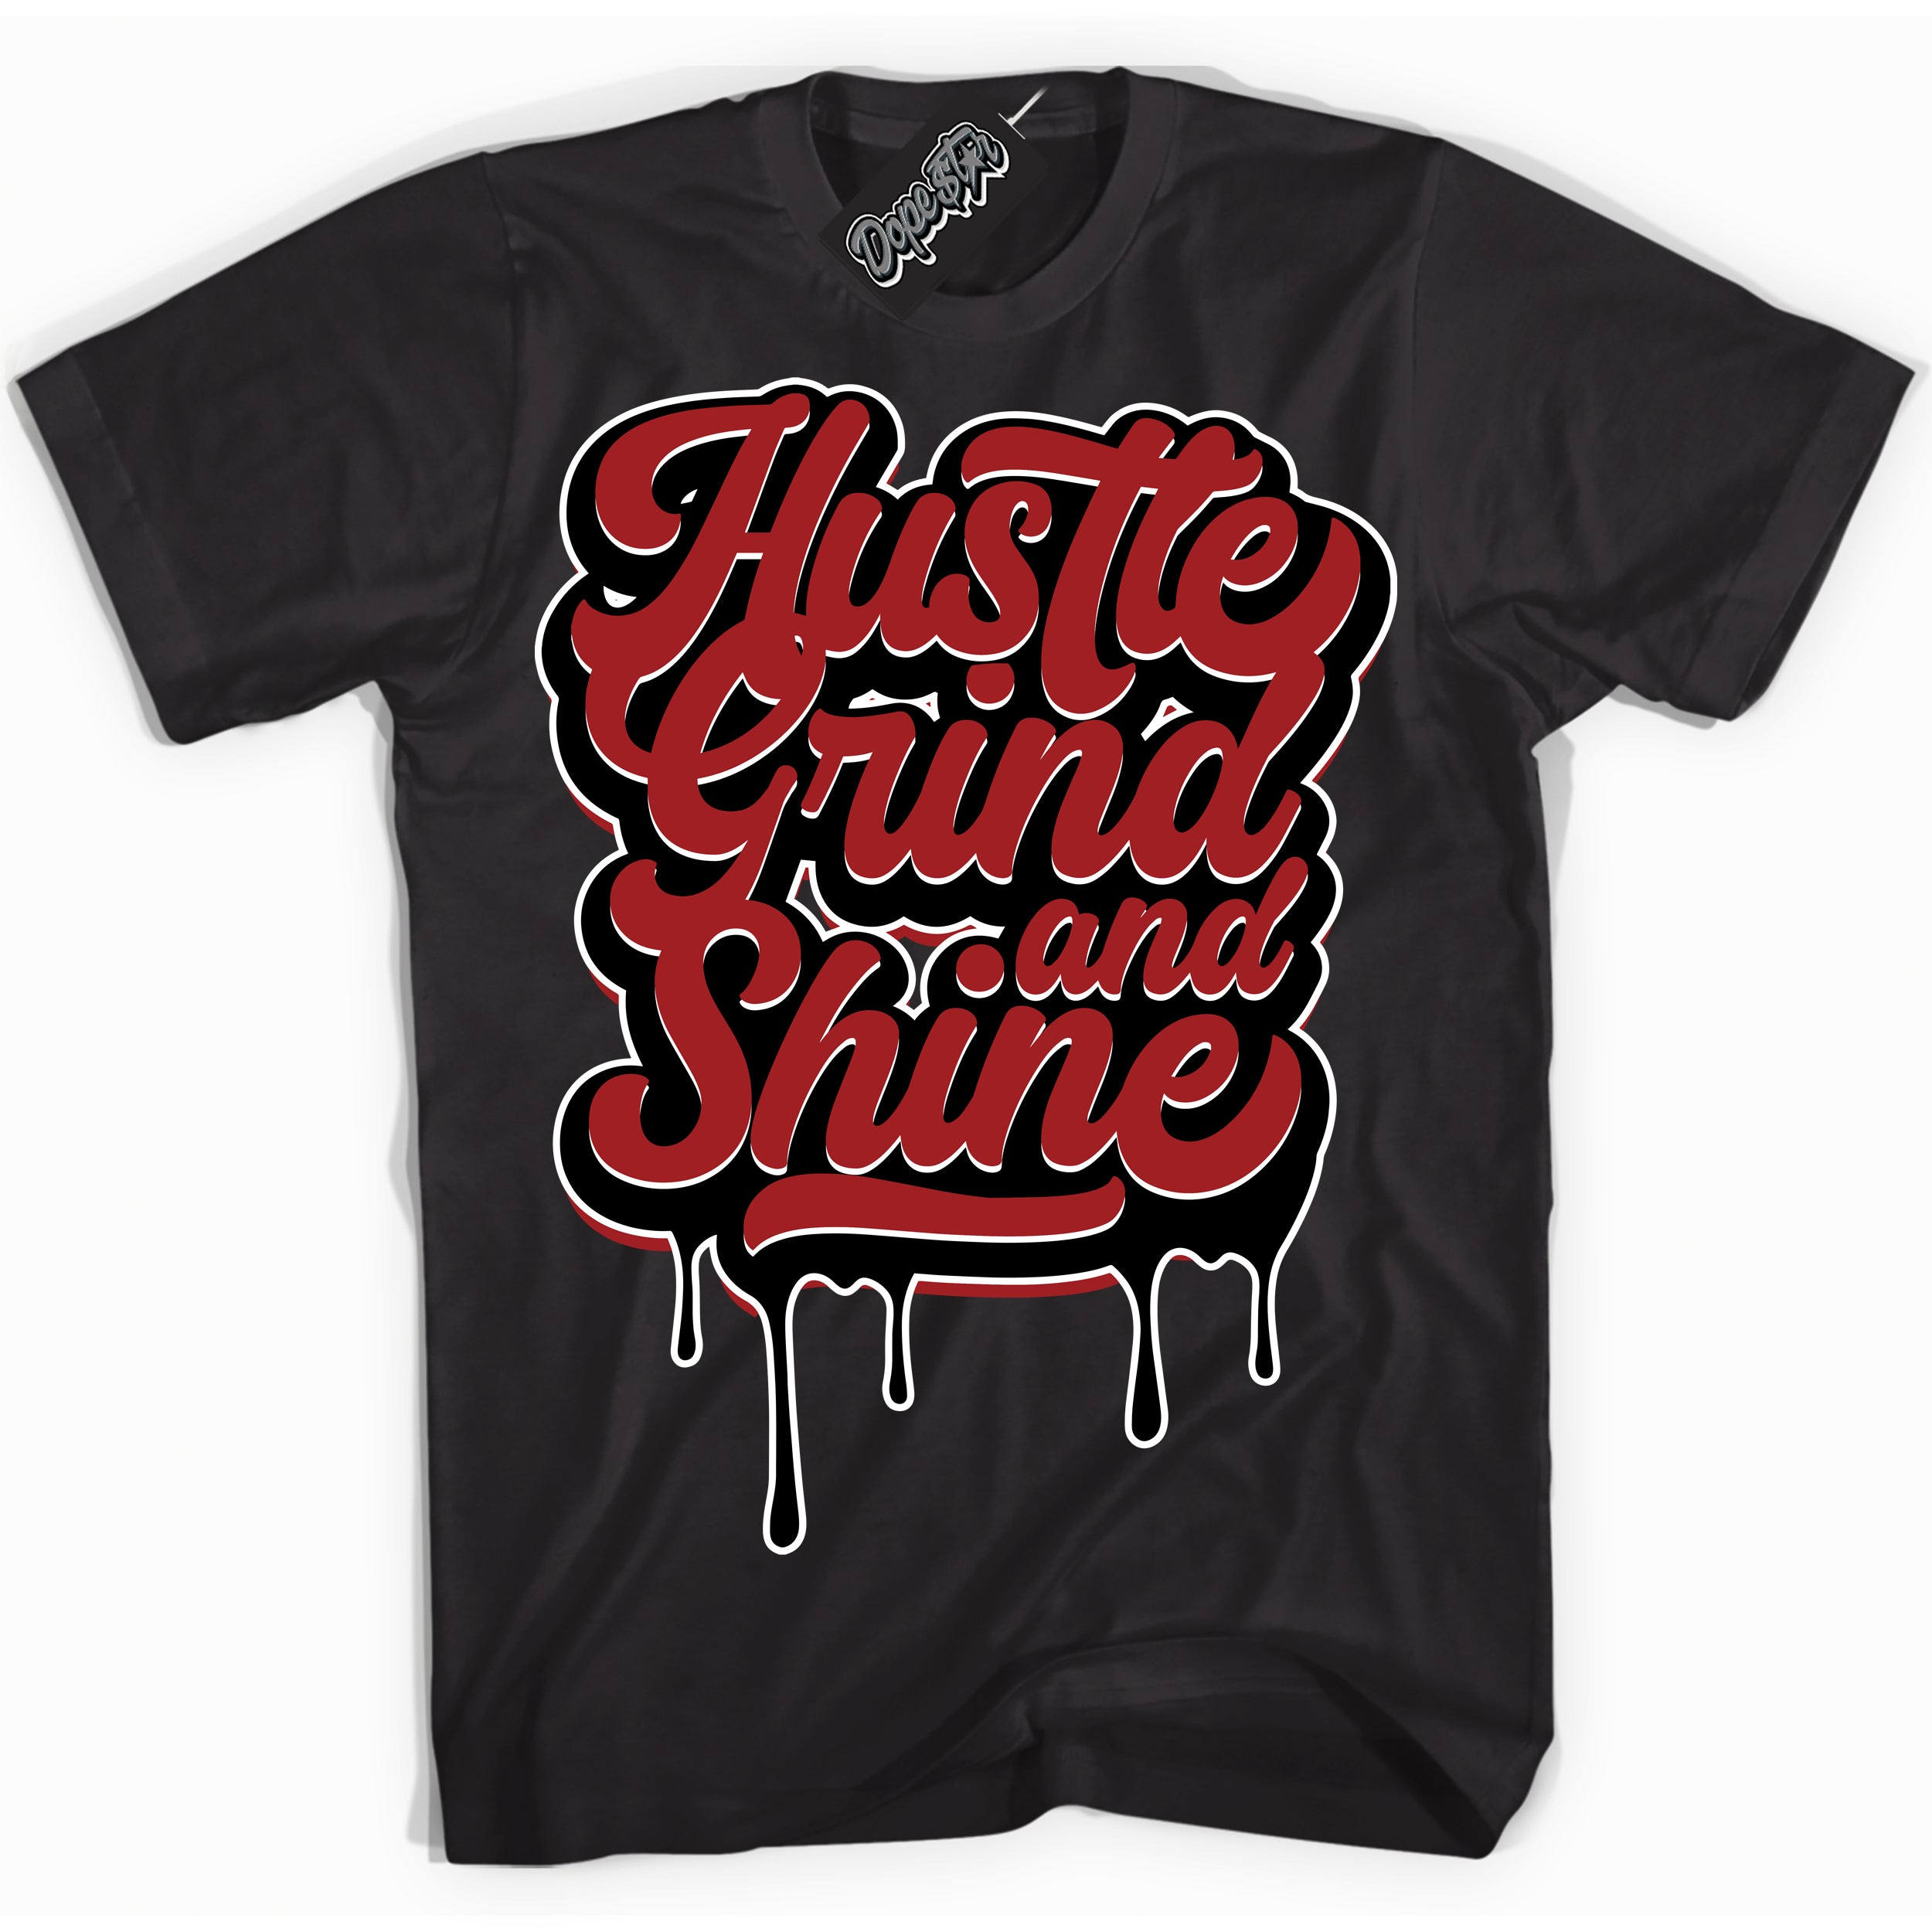 Cool Black graphic tee with “ Hustle Grind And Shine ” print, that perfectly matches Lost And Found 1s sneakers 